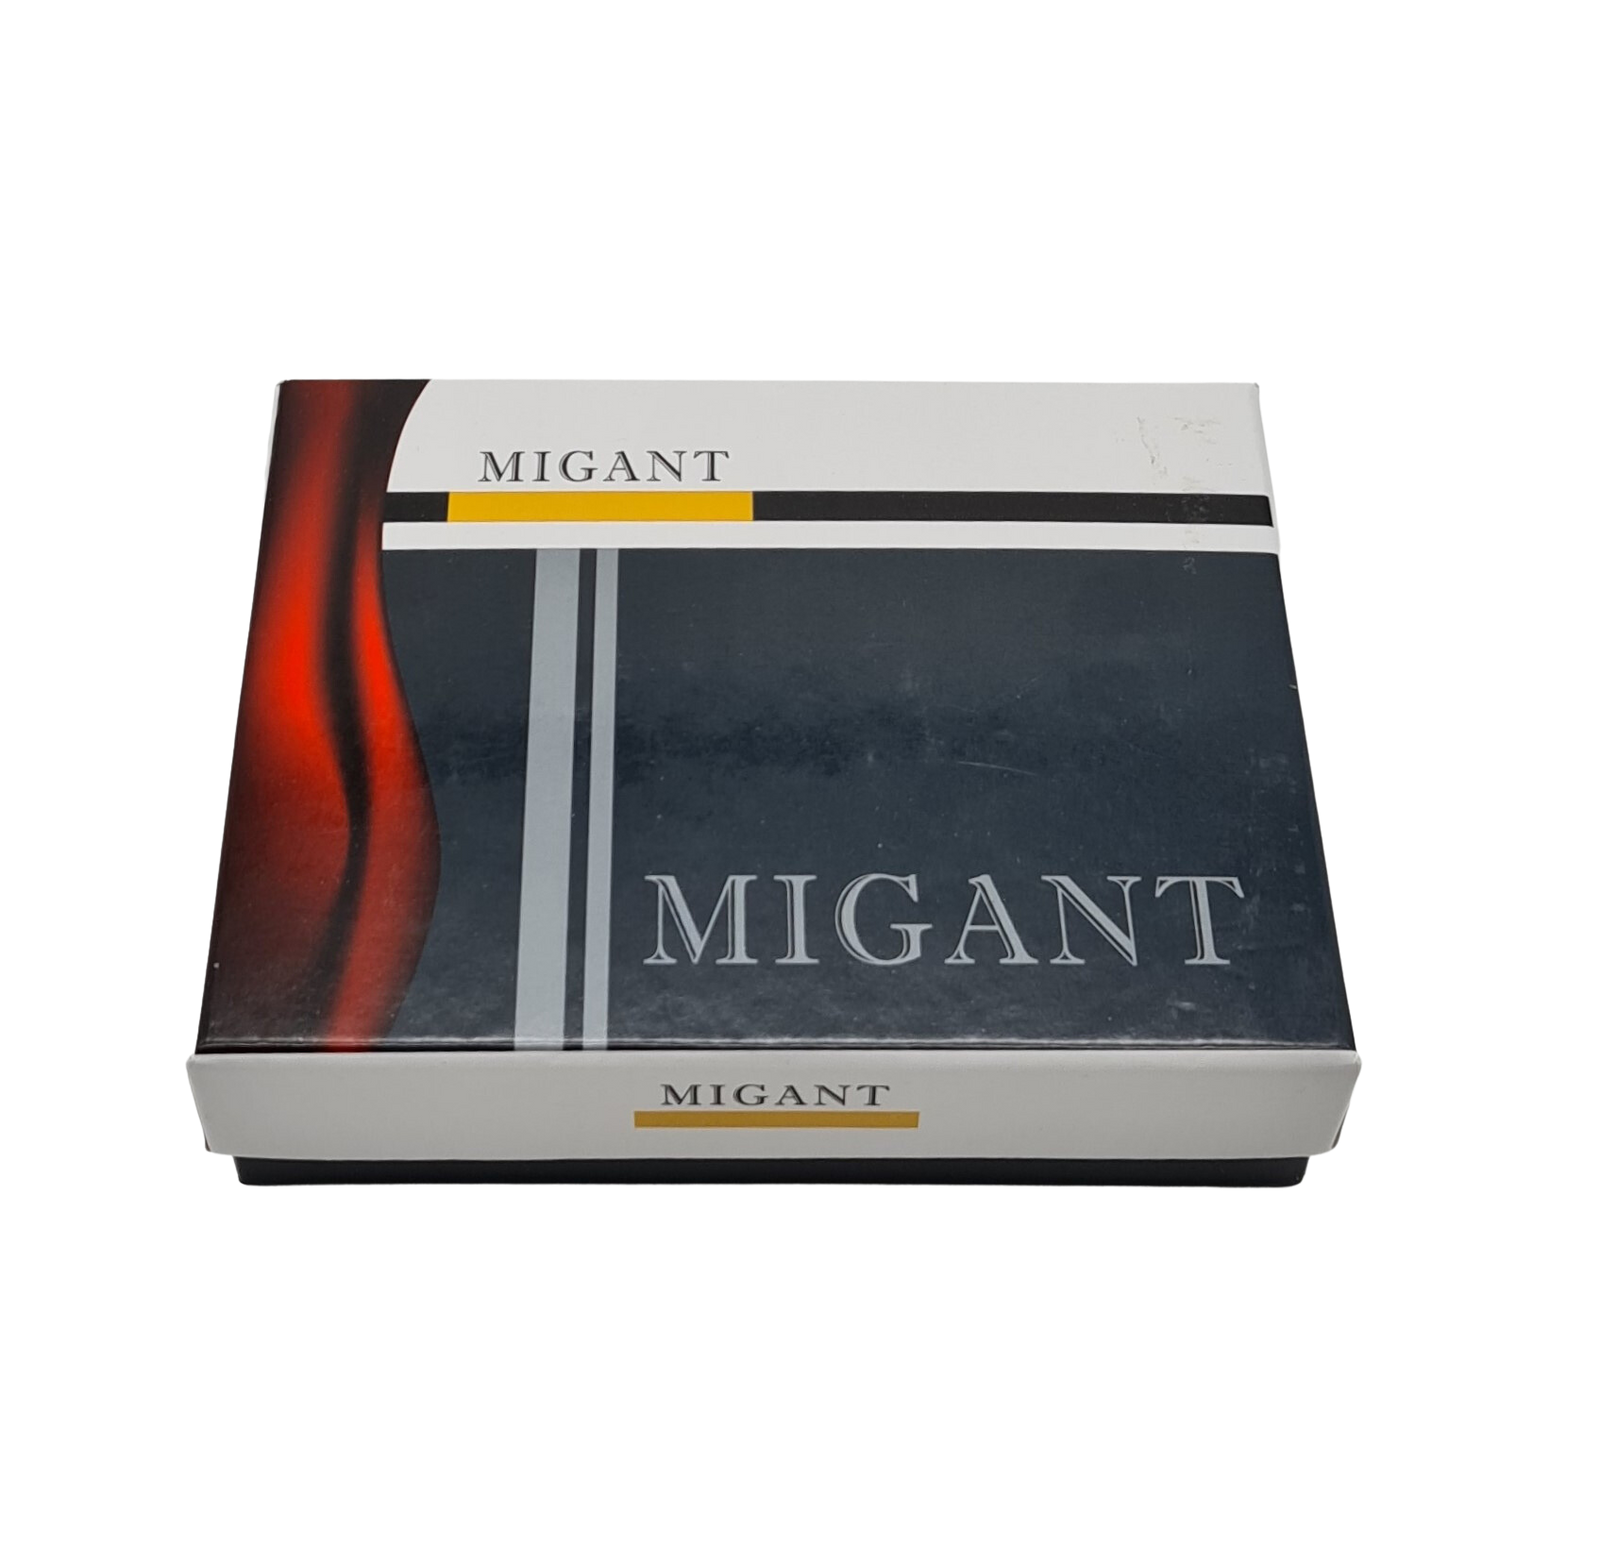 Migant Design leather mens wallet in giftbox FO-382